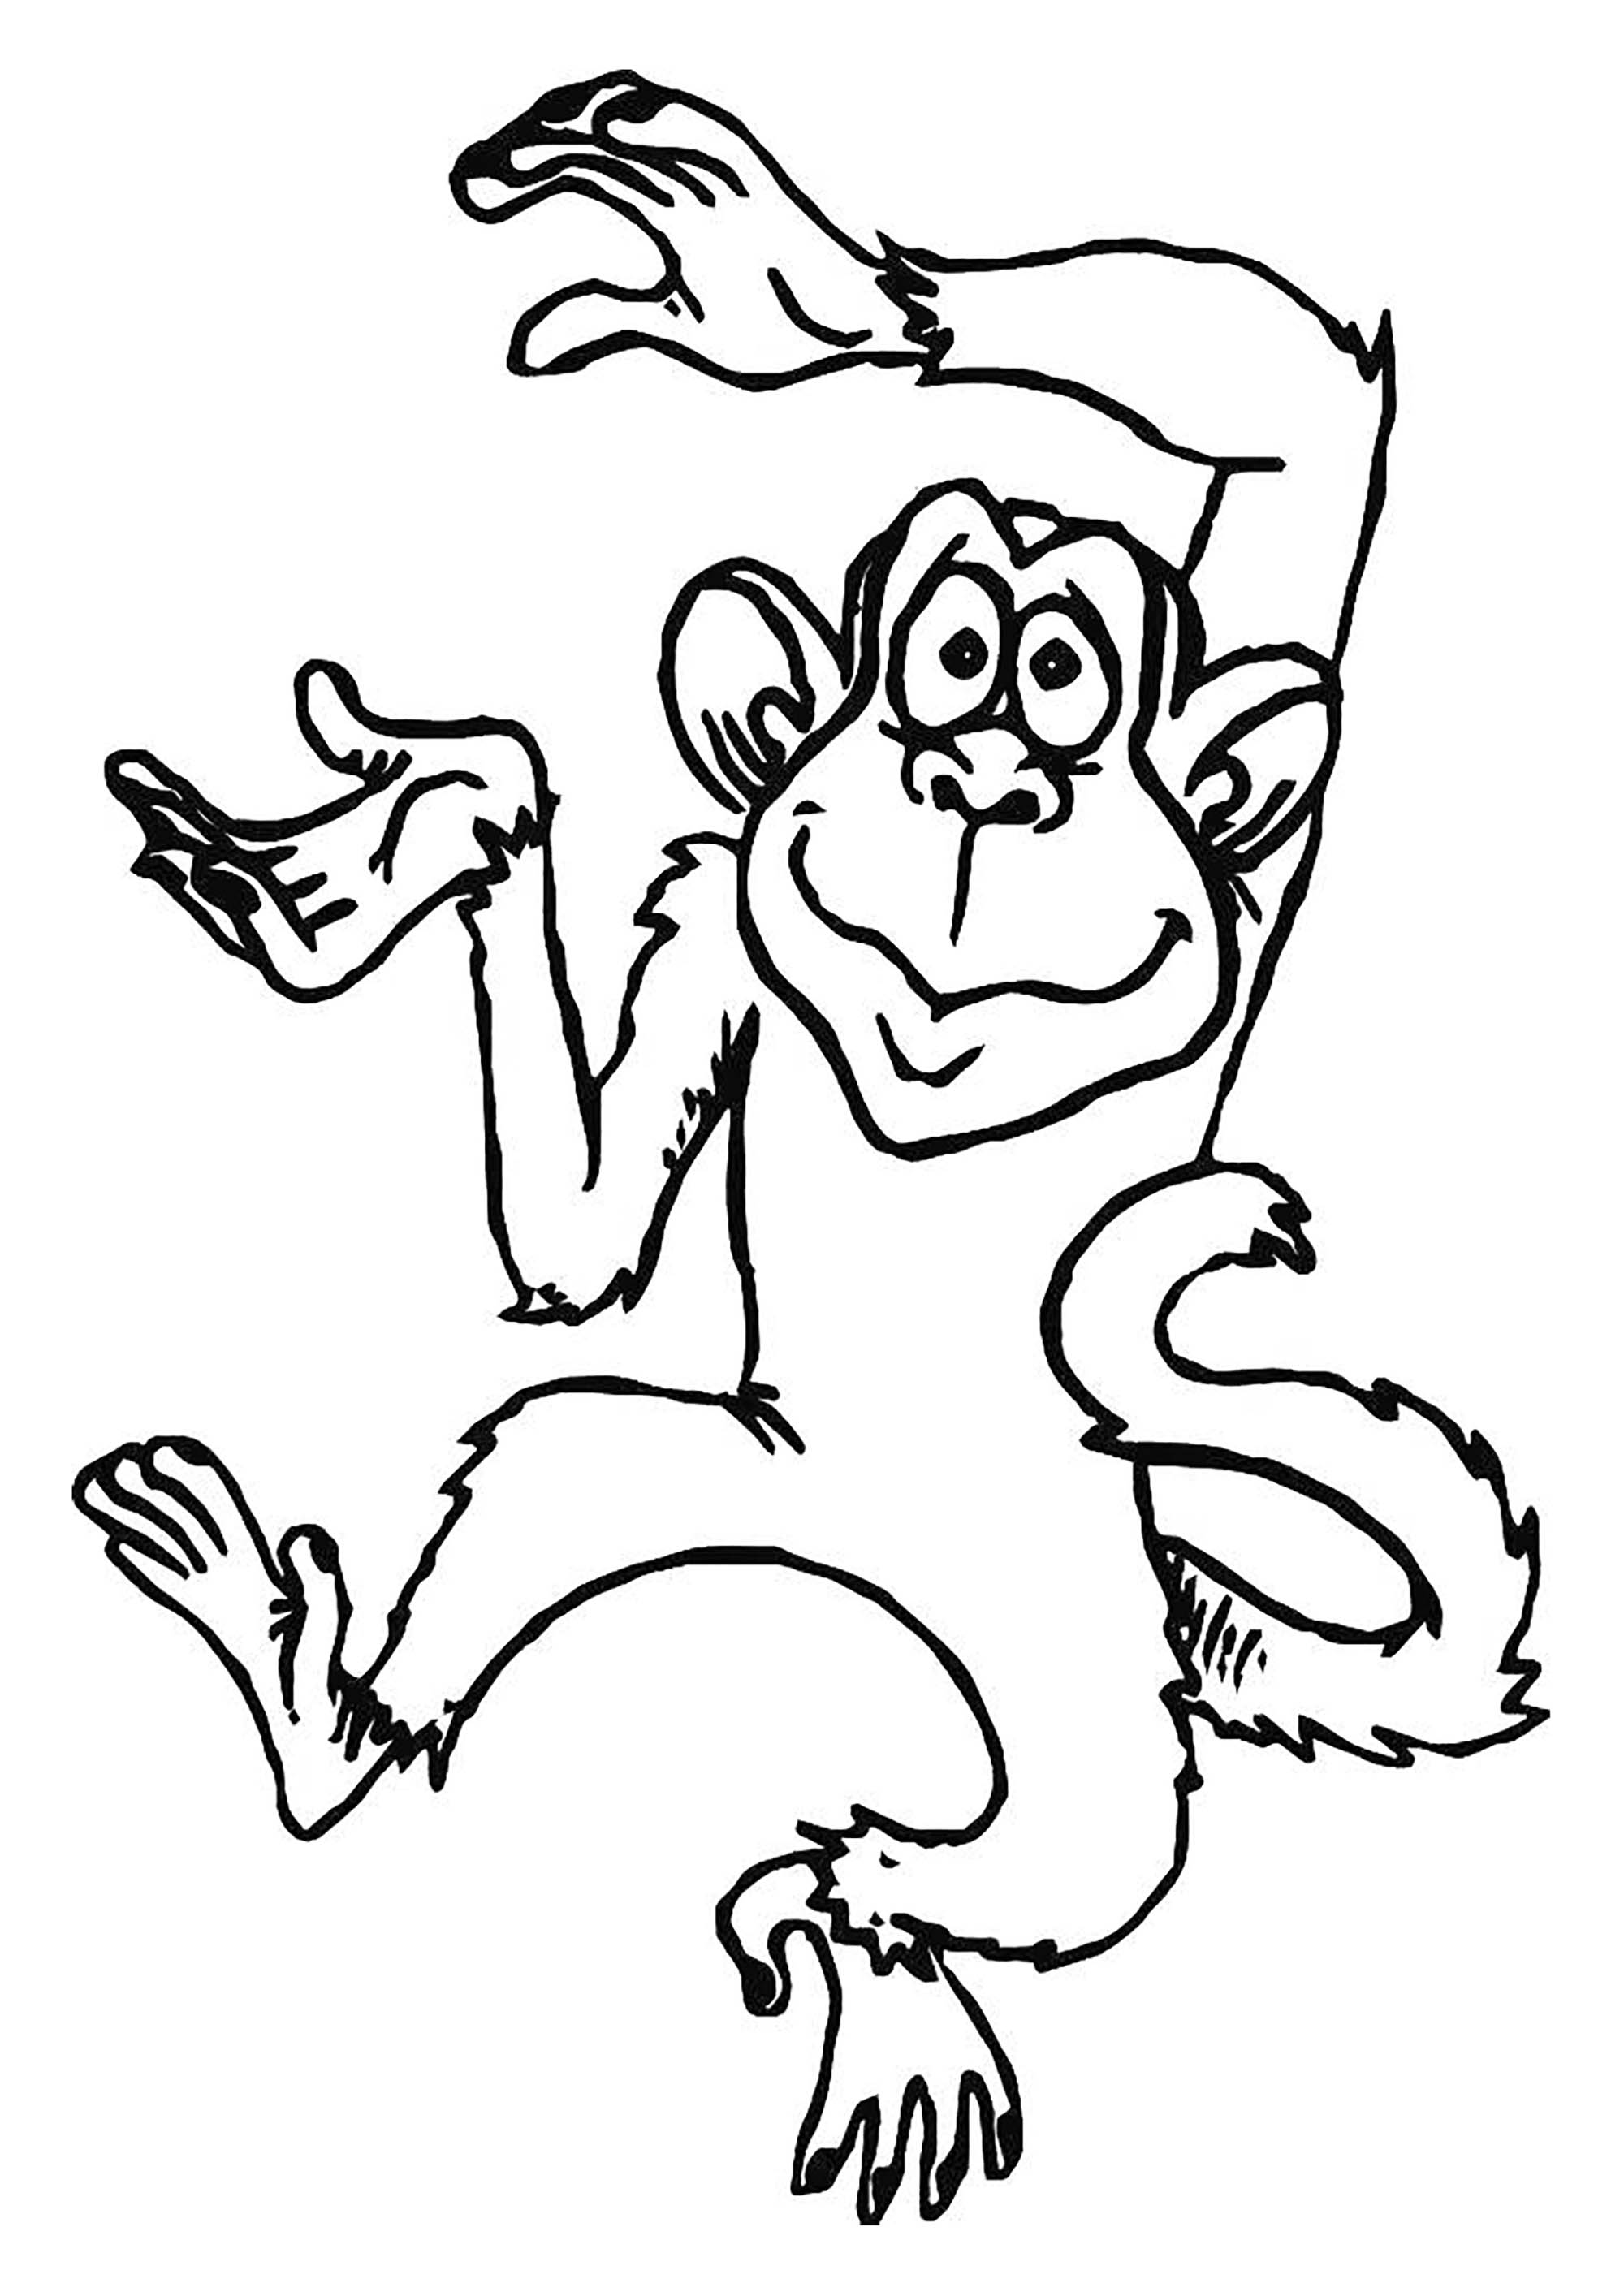 Monkey picture to print and color